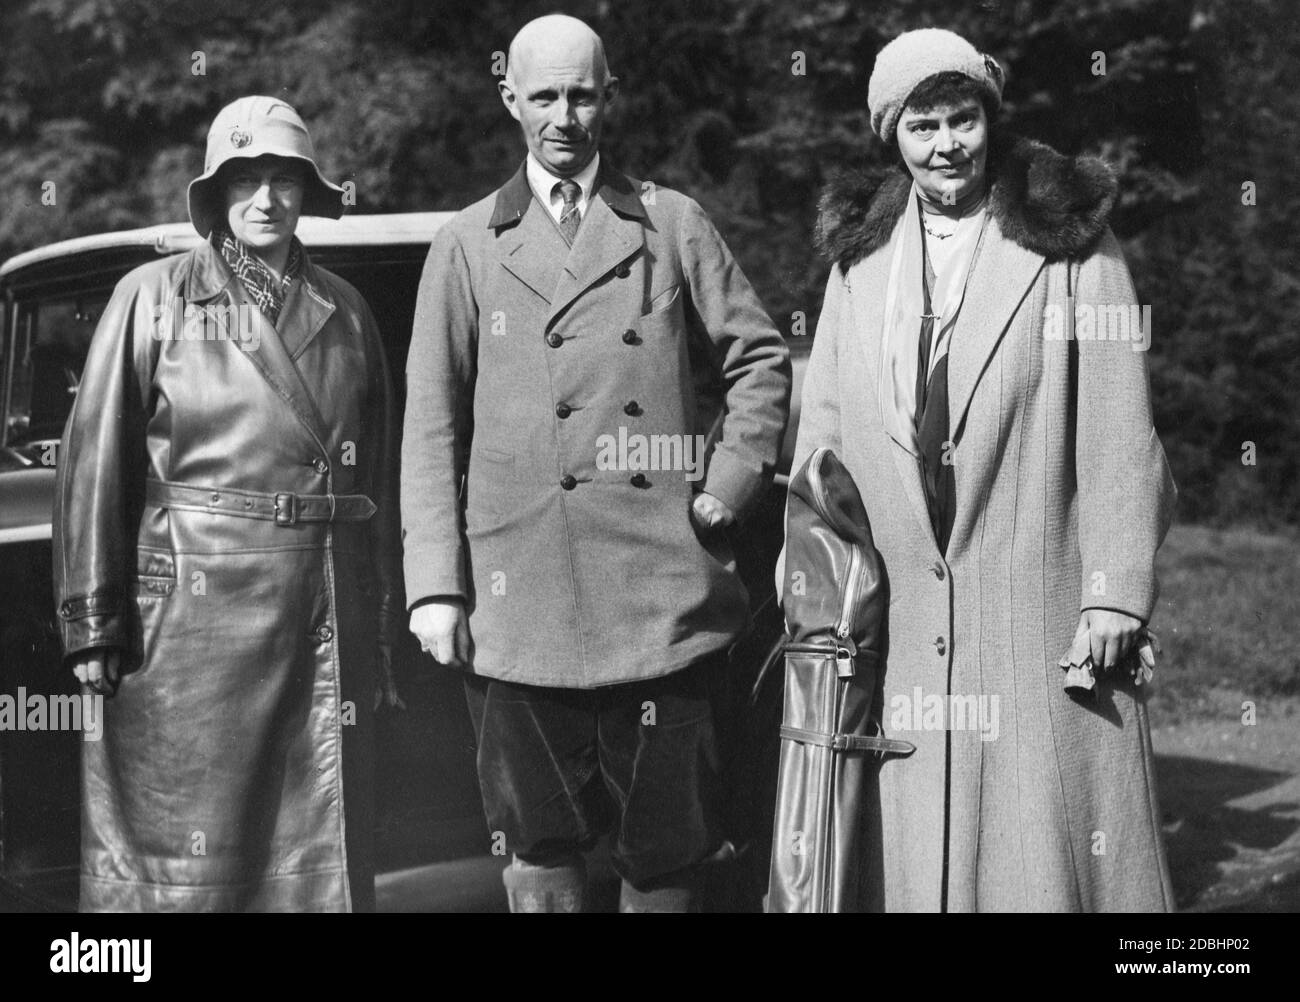 From left to right: Alexandrine of Mecklenburg (Queen of Denmark), Grand Duke Friedrich Franz VI of Mecklenburg-Schwerin and Crown Princess Cecilie of Mecklenburg in 1931. The three siblings are about to leave for the golf course. Cecilie is holding a leather golf bag in her hand. Stock Photo